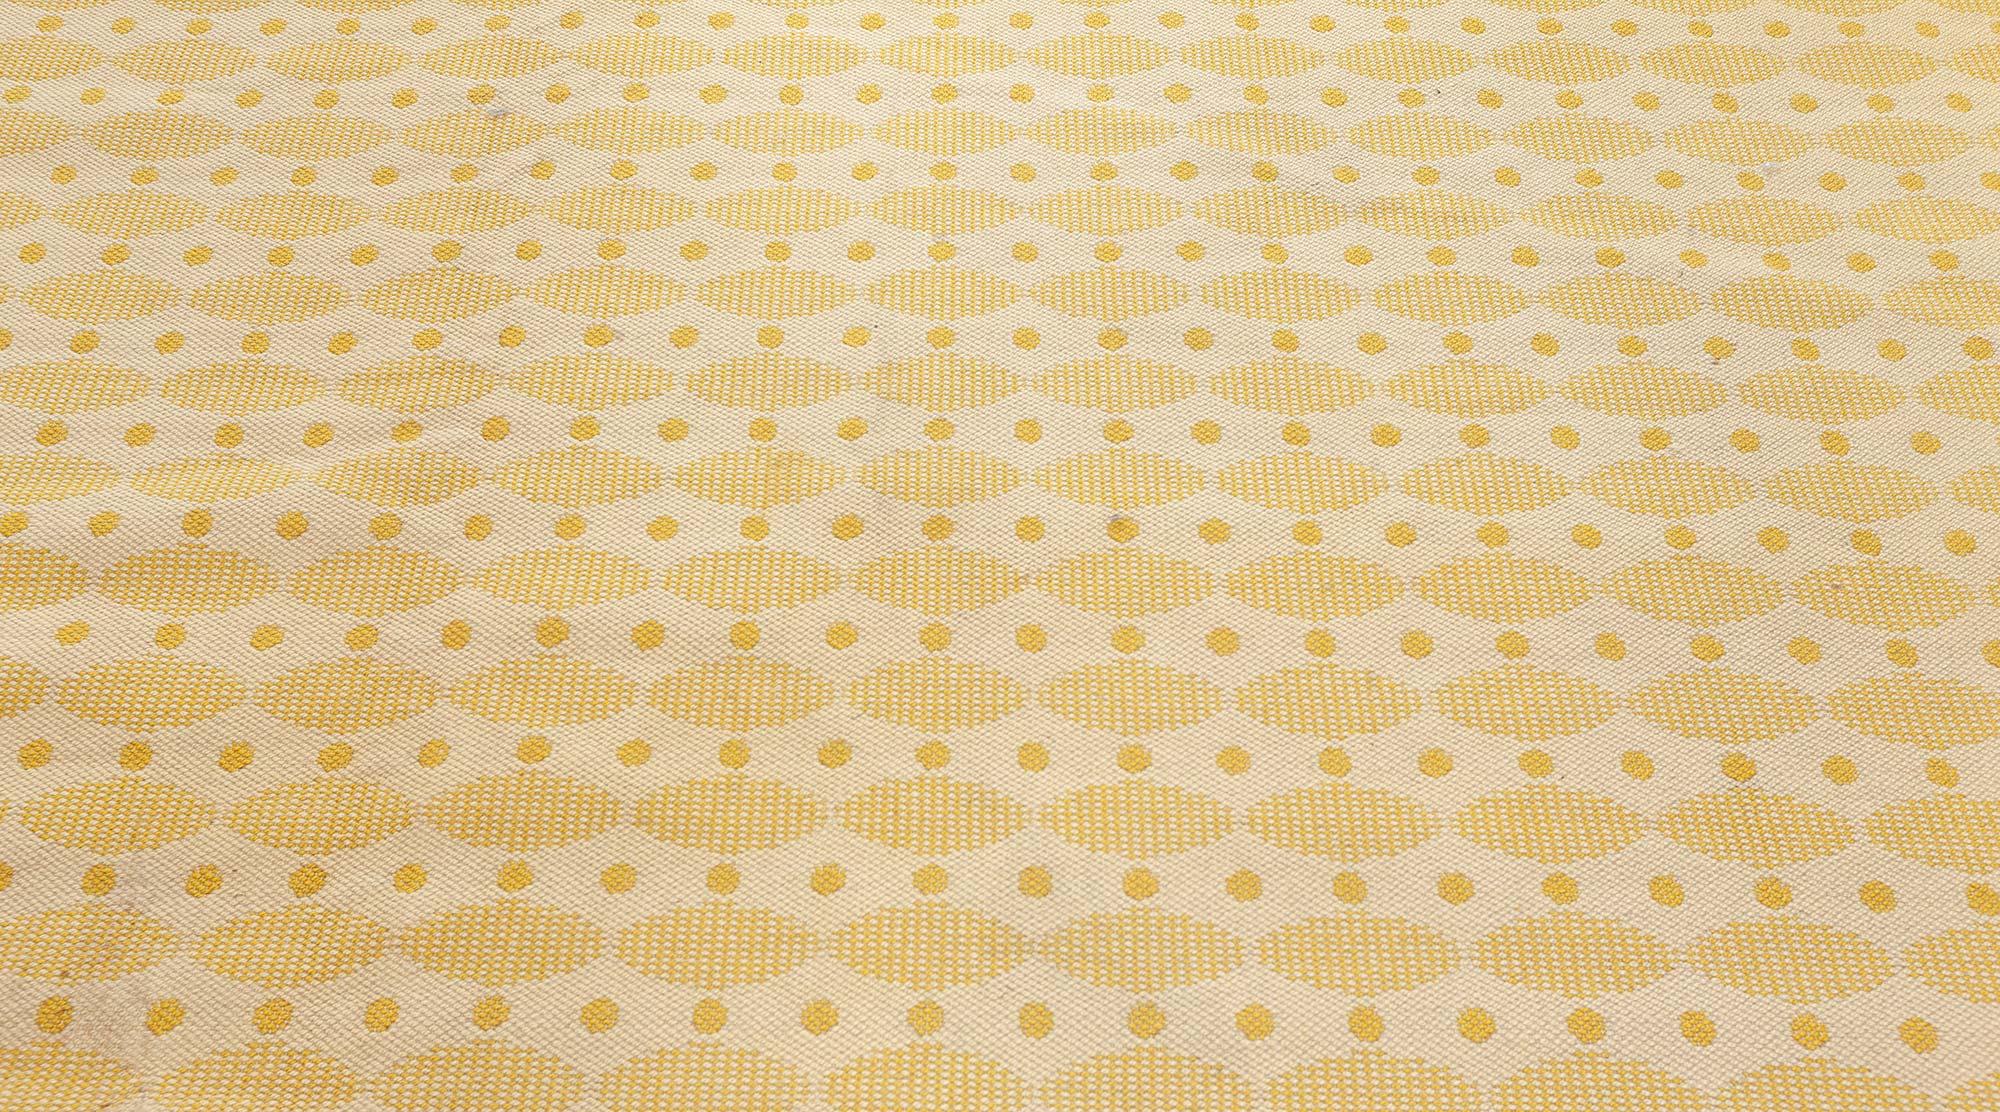 Mid-20th century Swedish yellow double sided fragment rug
Measures: Size: 5'7